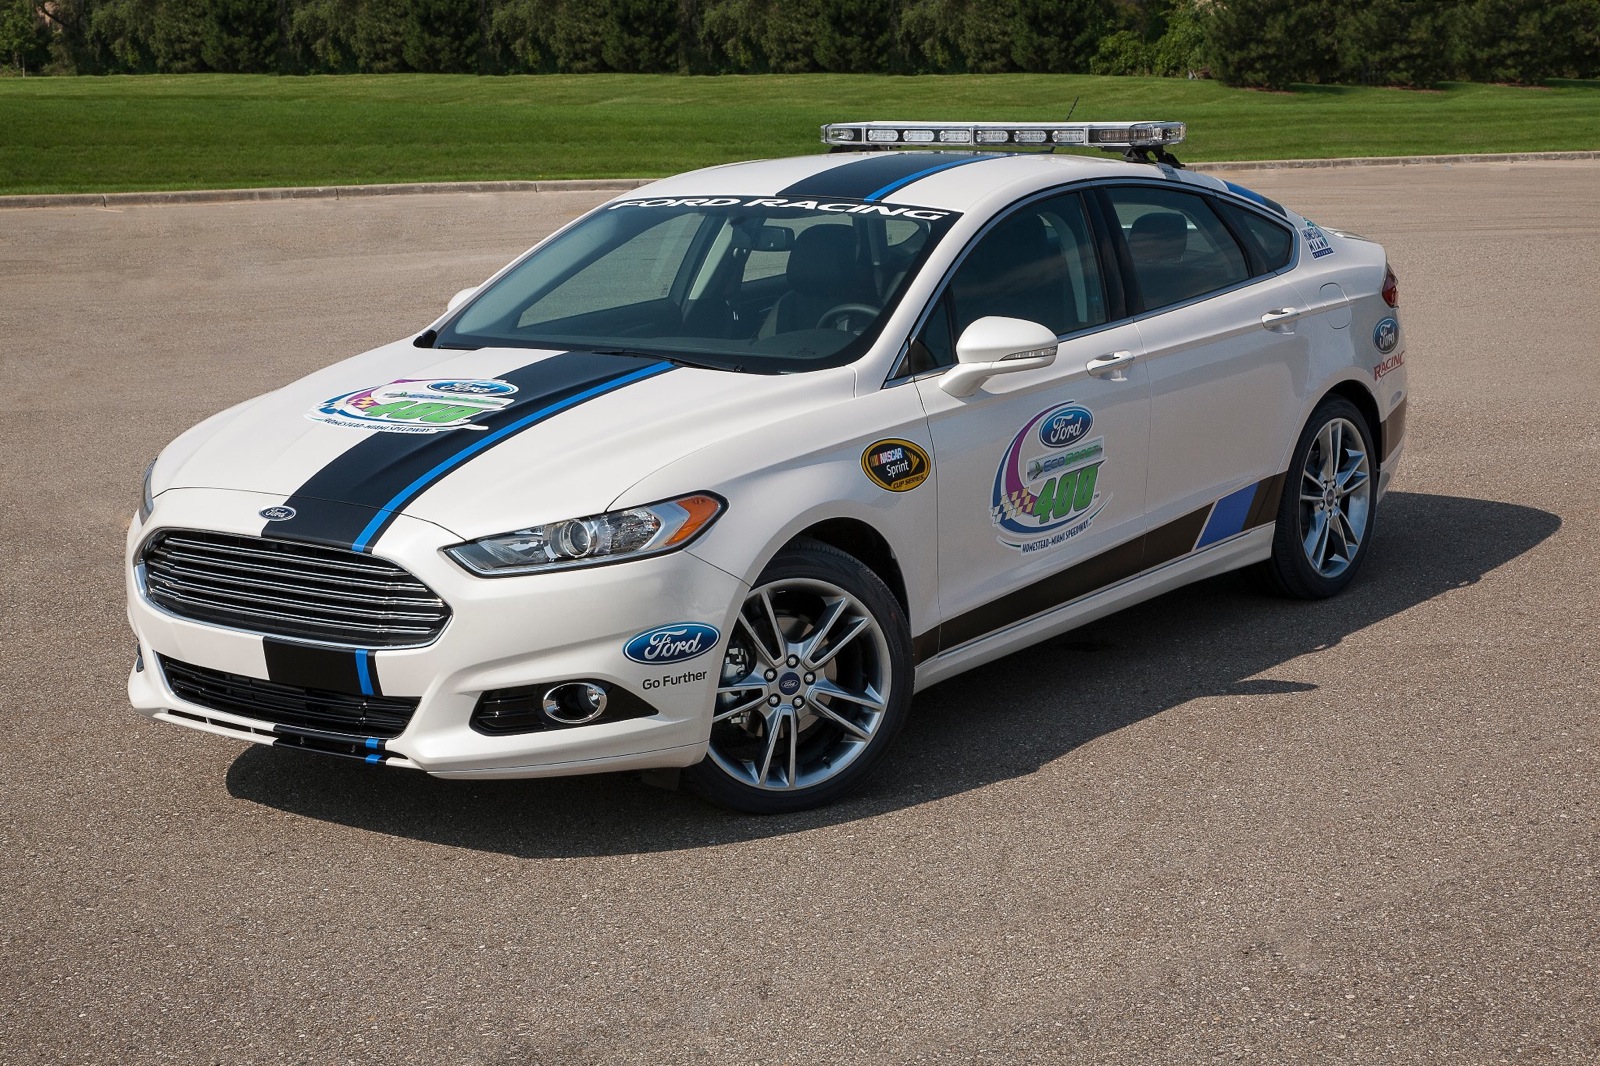 2013 Ford Fusion NASCAR Sprint Cup Pace Car Going To Lucky Fan